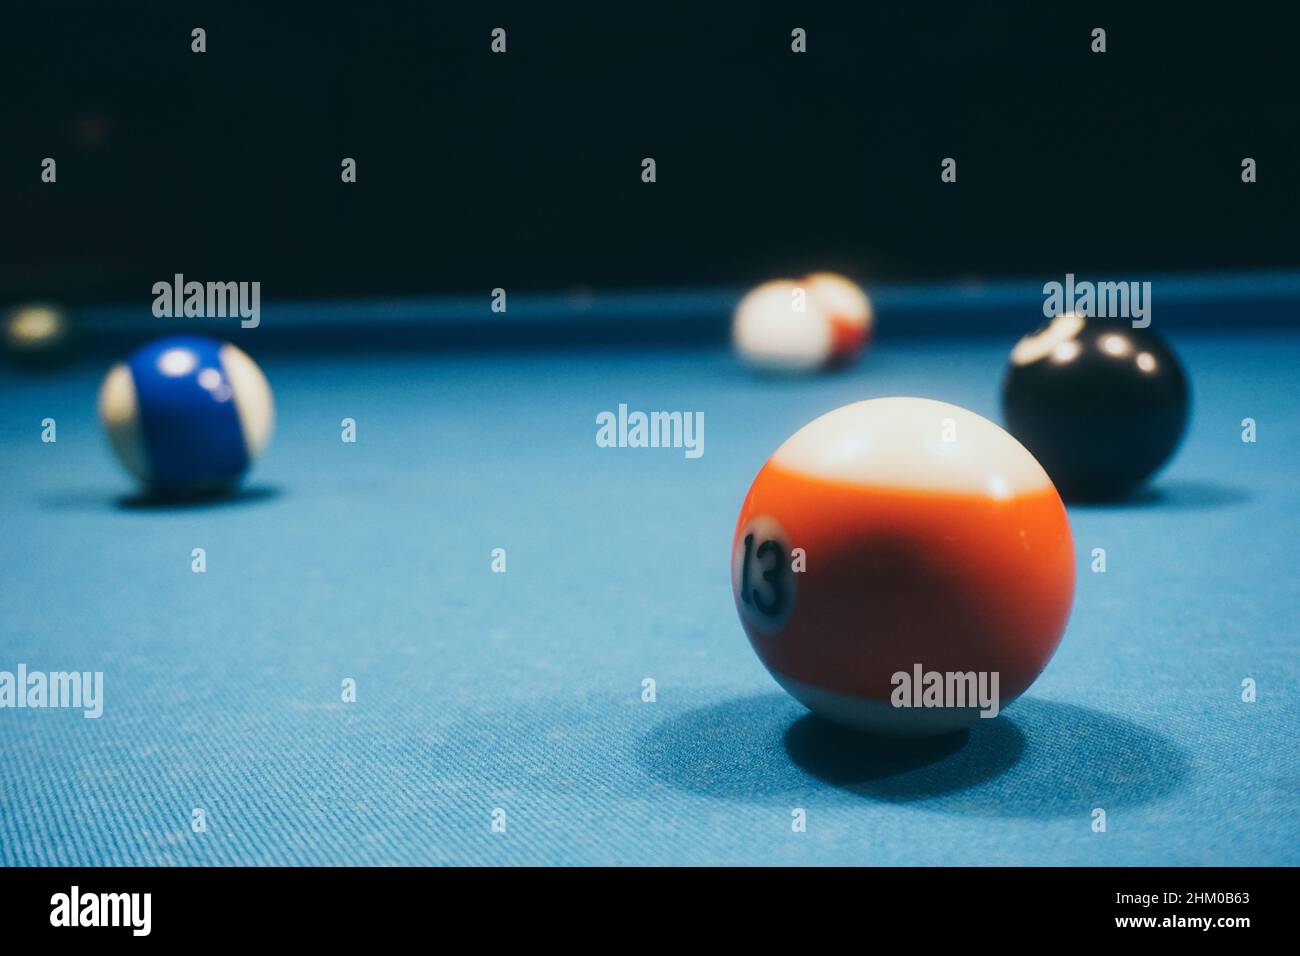 Pool game - balls on a table Stock Photo